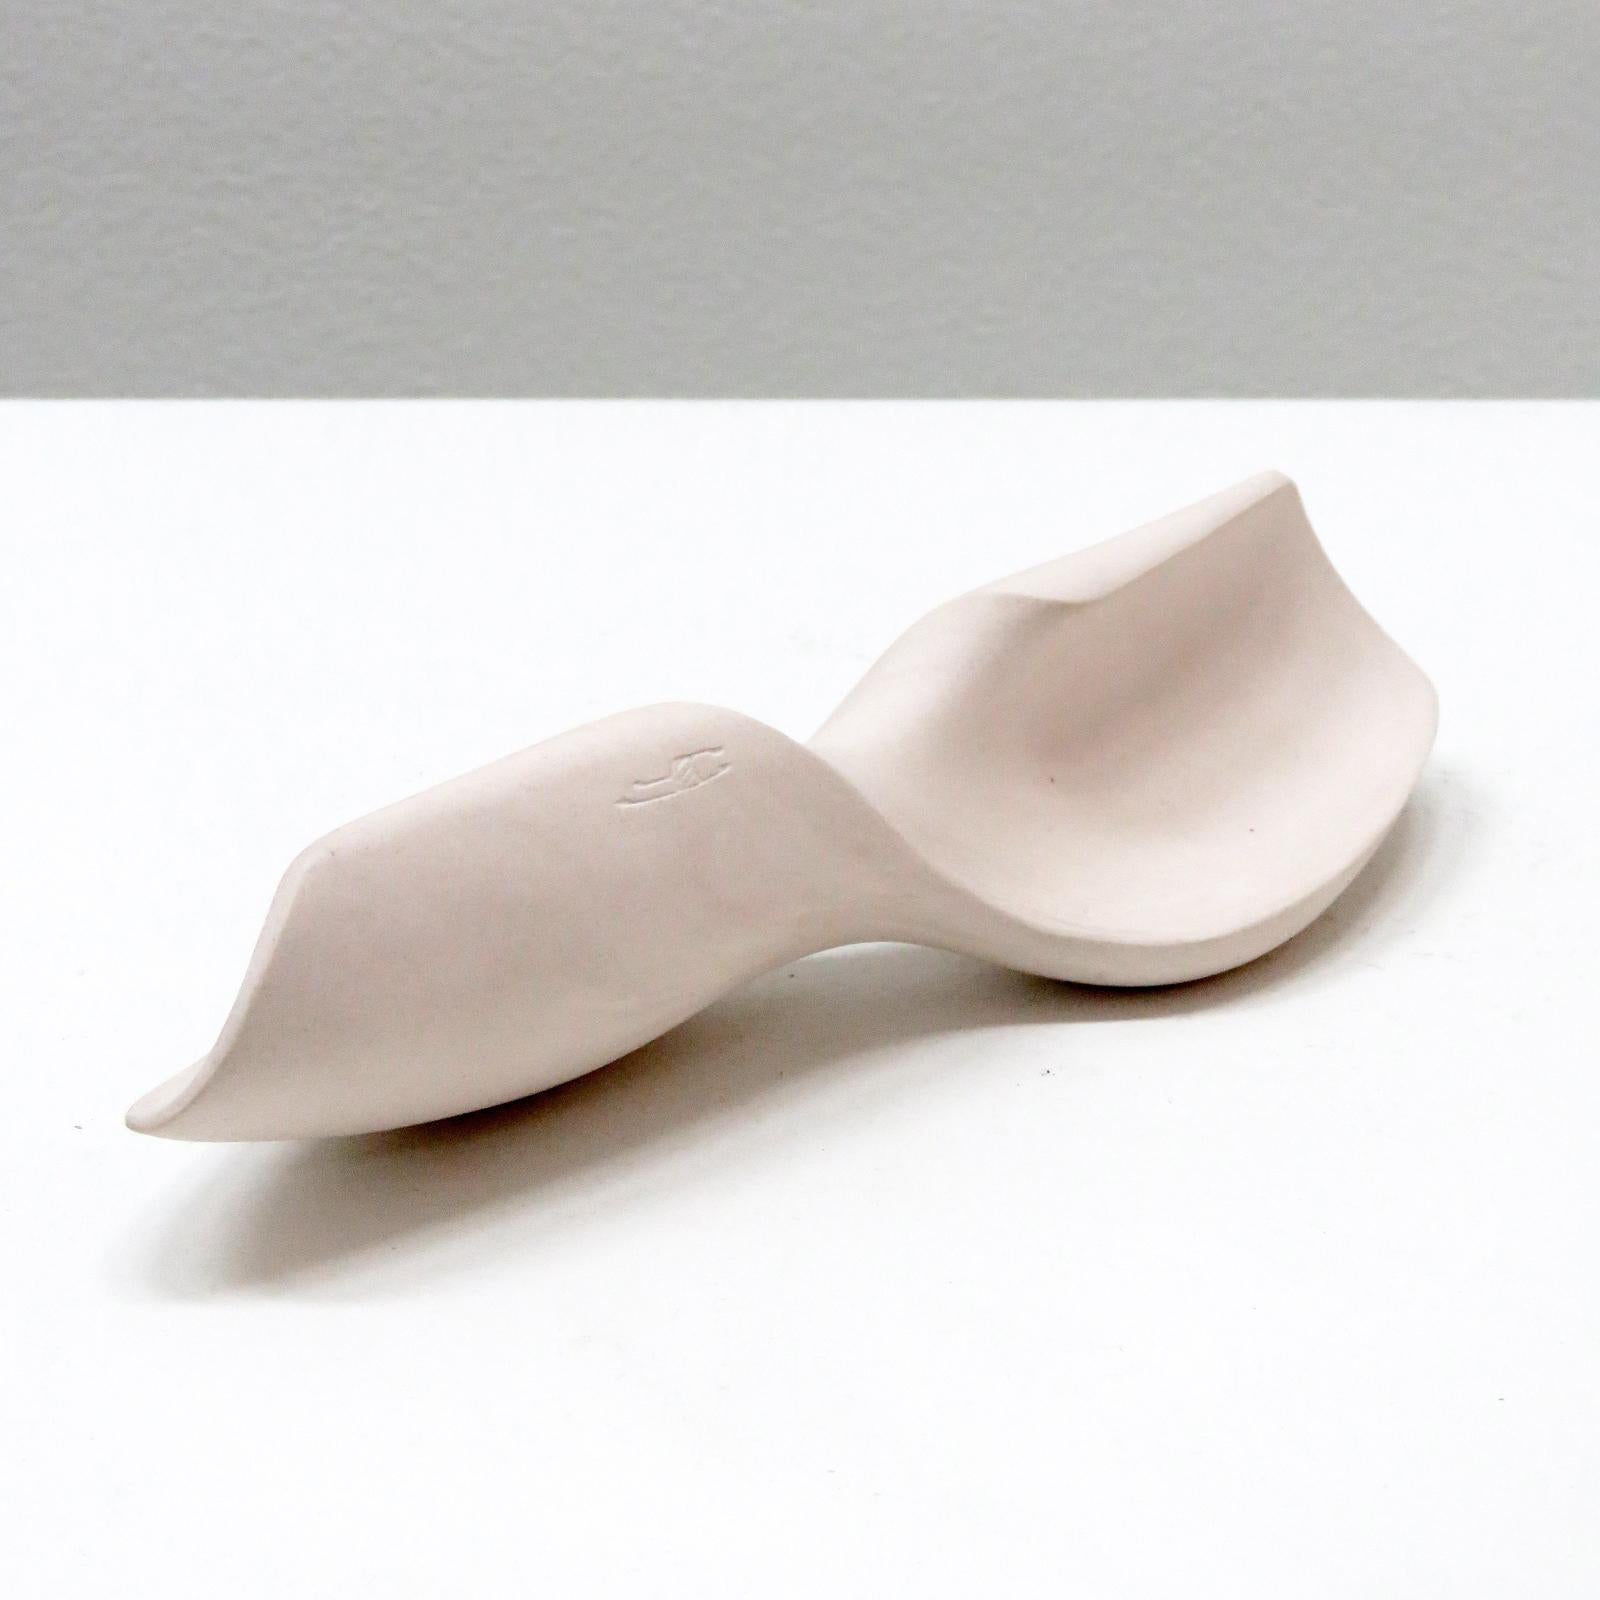 stunning palm stone titled 'propeller', handcrafted by Los Angeles based ceramicist Jed Farlow. A one-of-a-kind unglazed porcelain sculpture, part of an ongoing 'Bone' series. Each of these unique pieces is meticulously crafted and meant to be hand